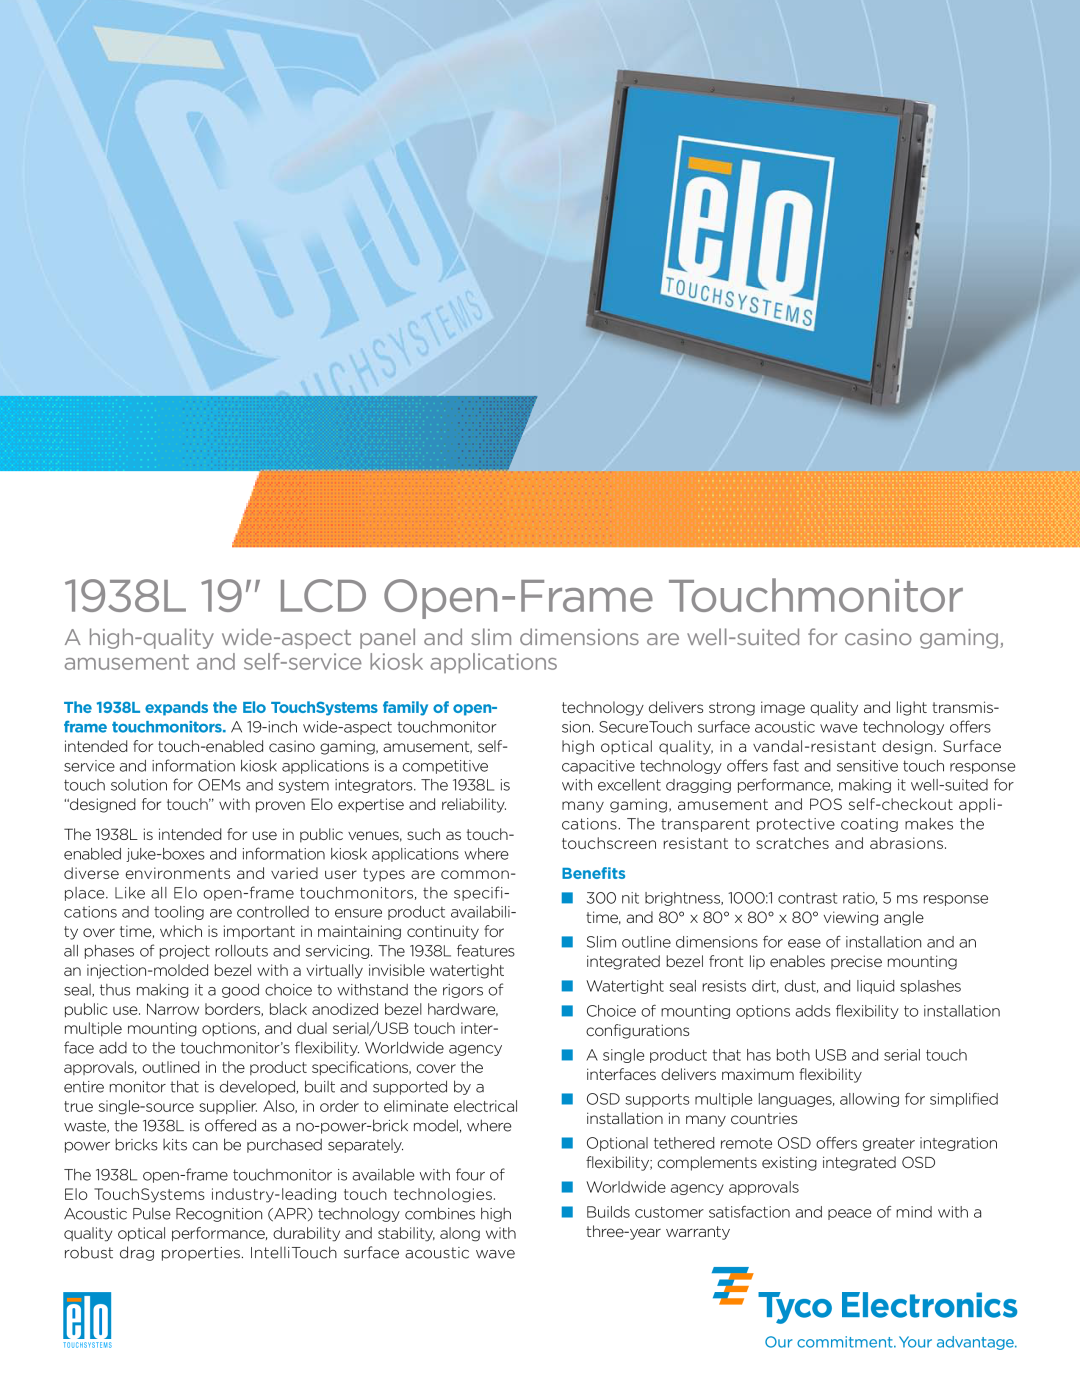 Elo TouchSystems dimensions Benefits, 1938L 19 LCD Open-Frame Touchmonitor 